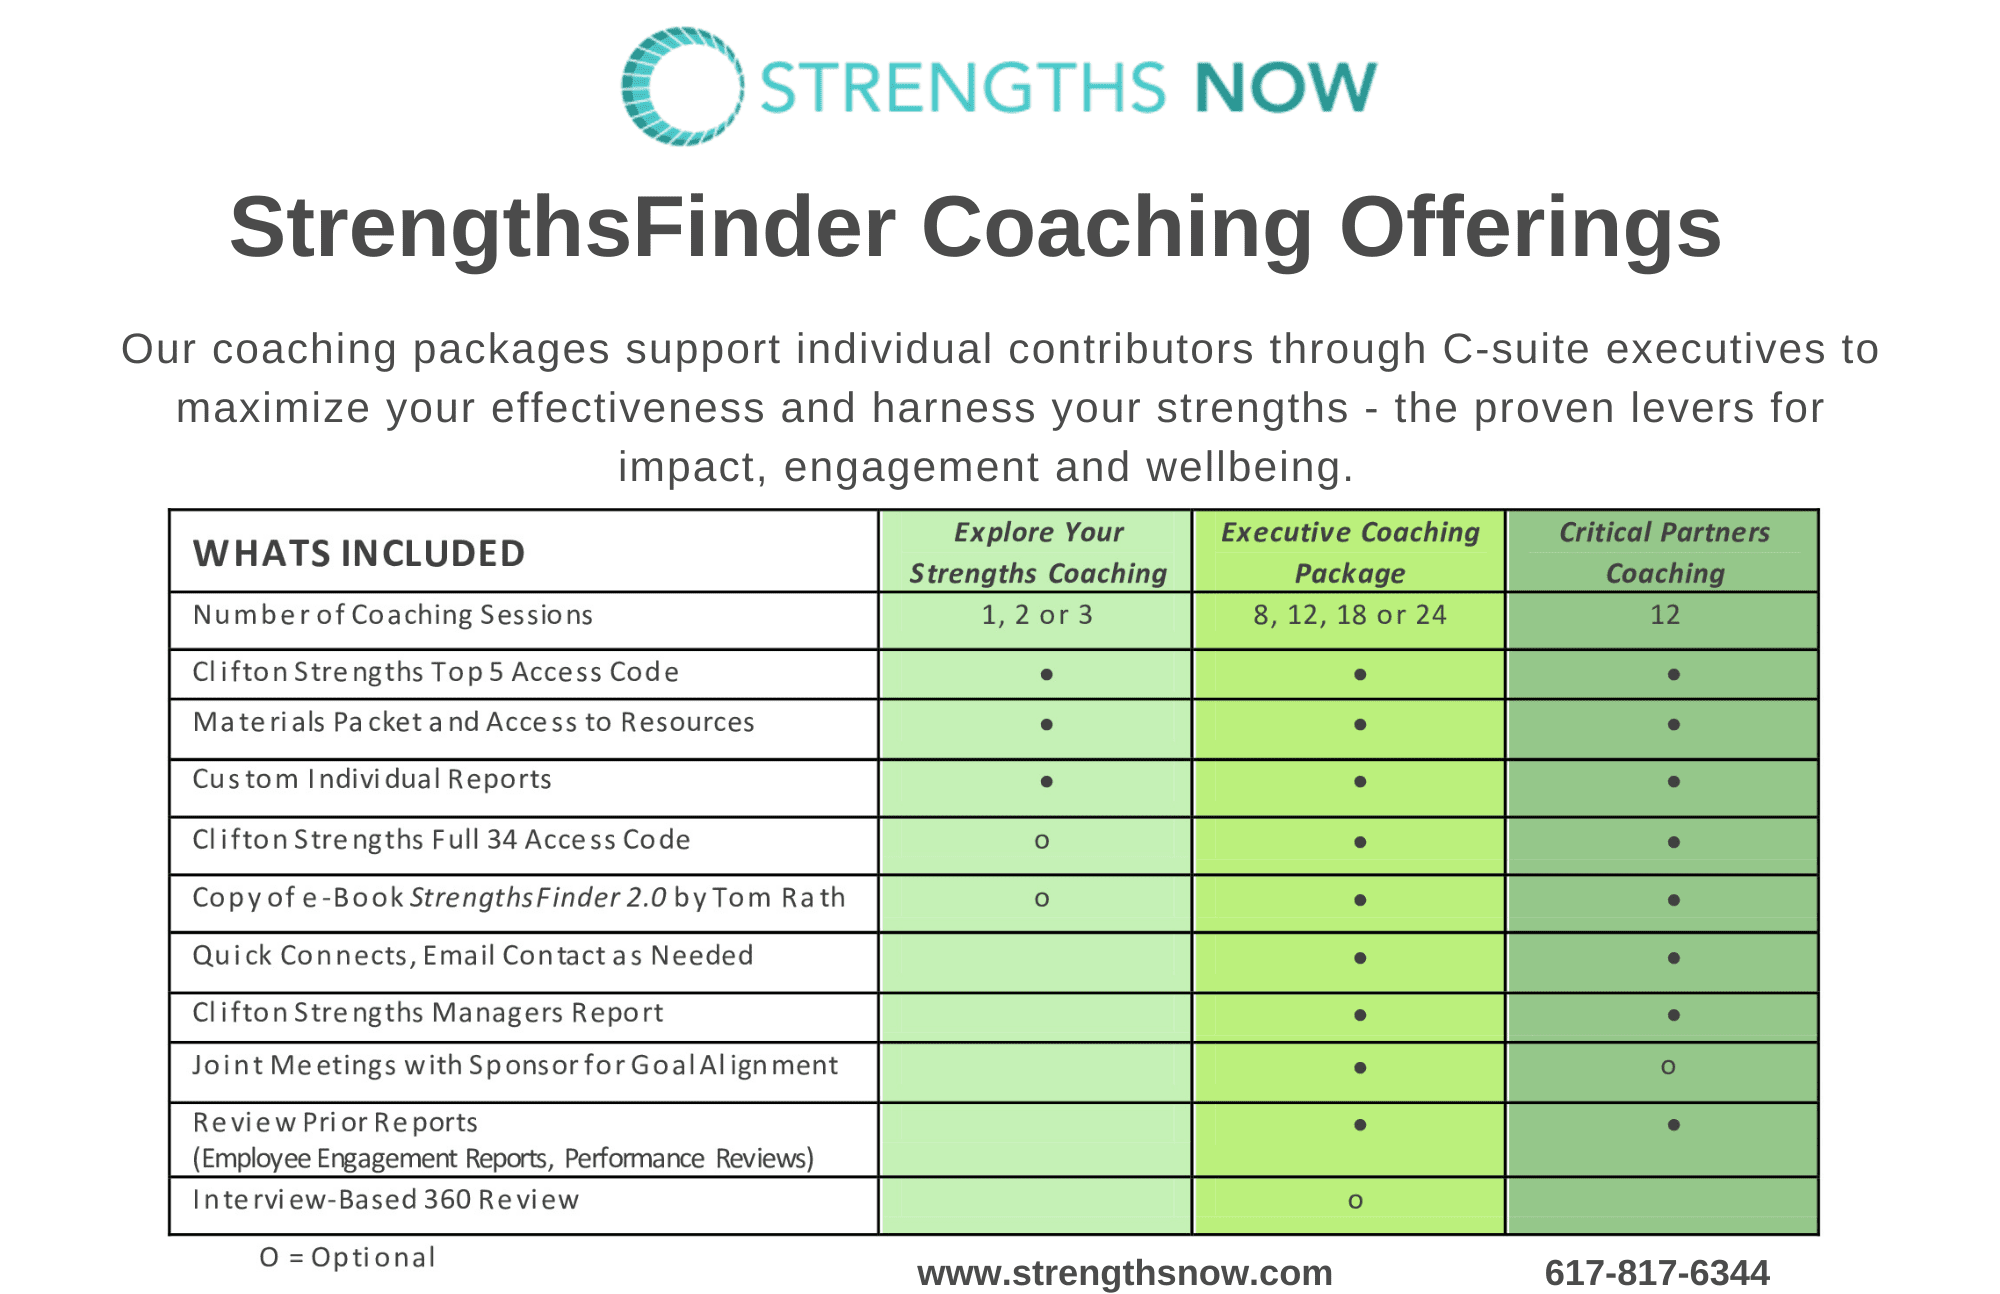 Strengths Finder Coaching Offerings.